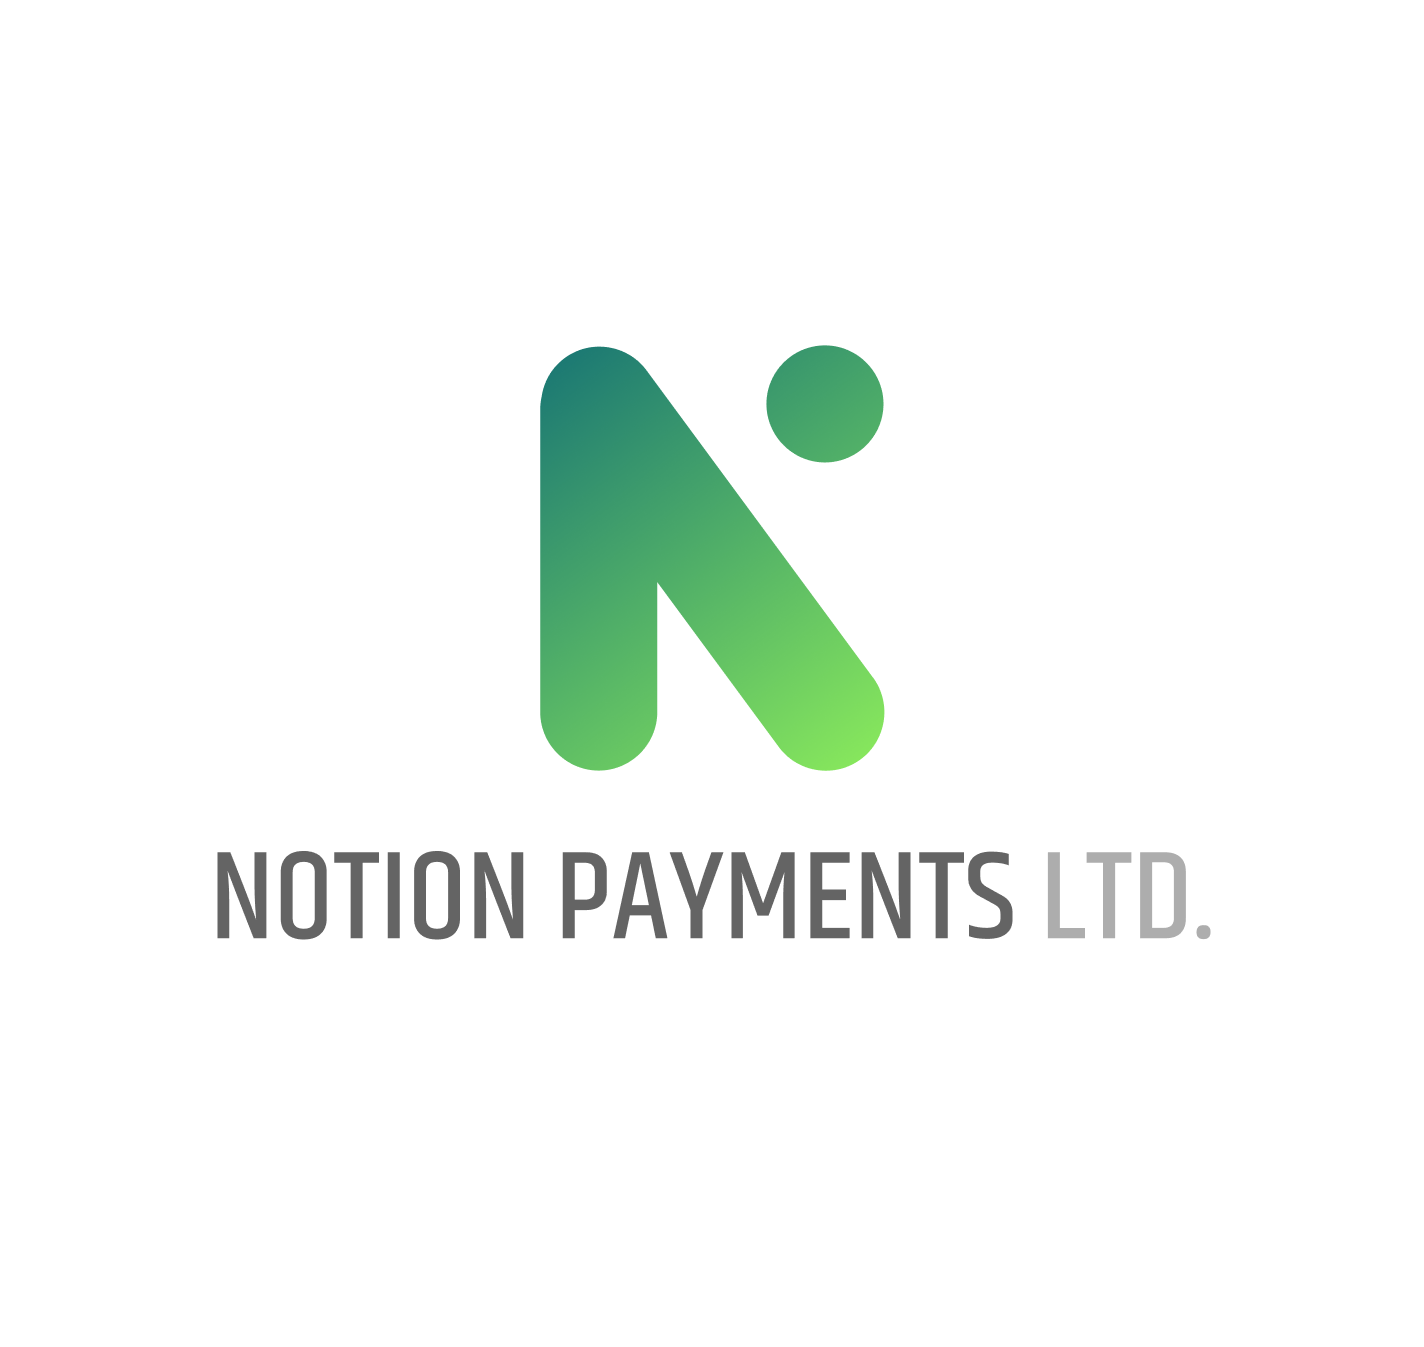 NOTION PAYMENTS 